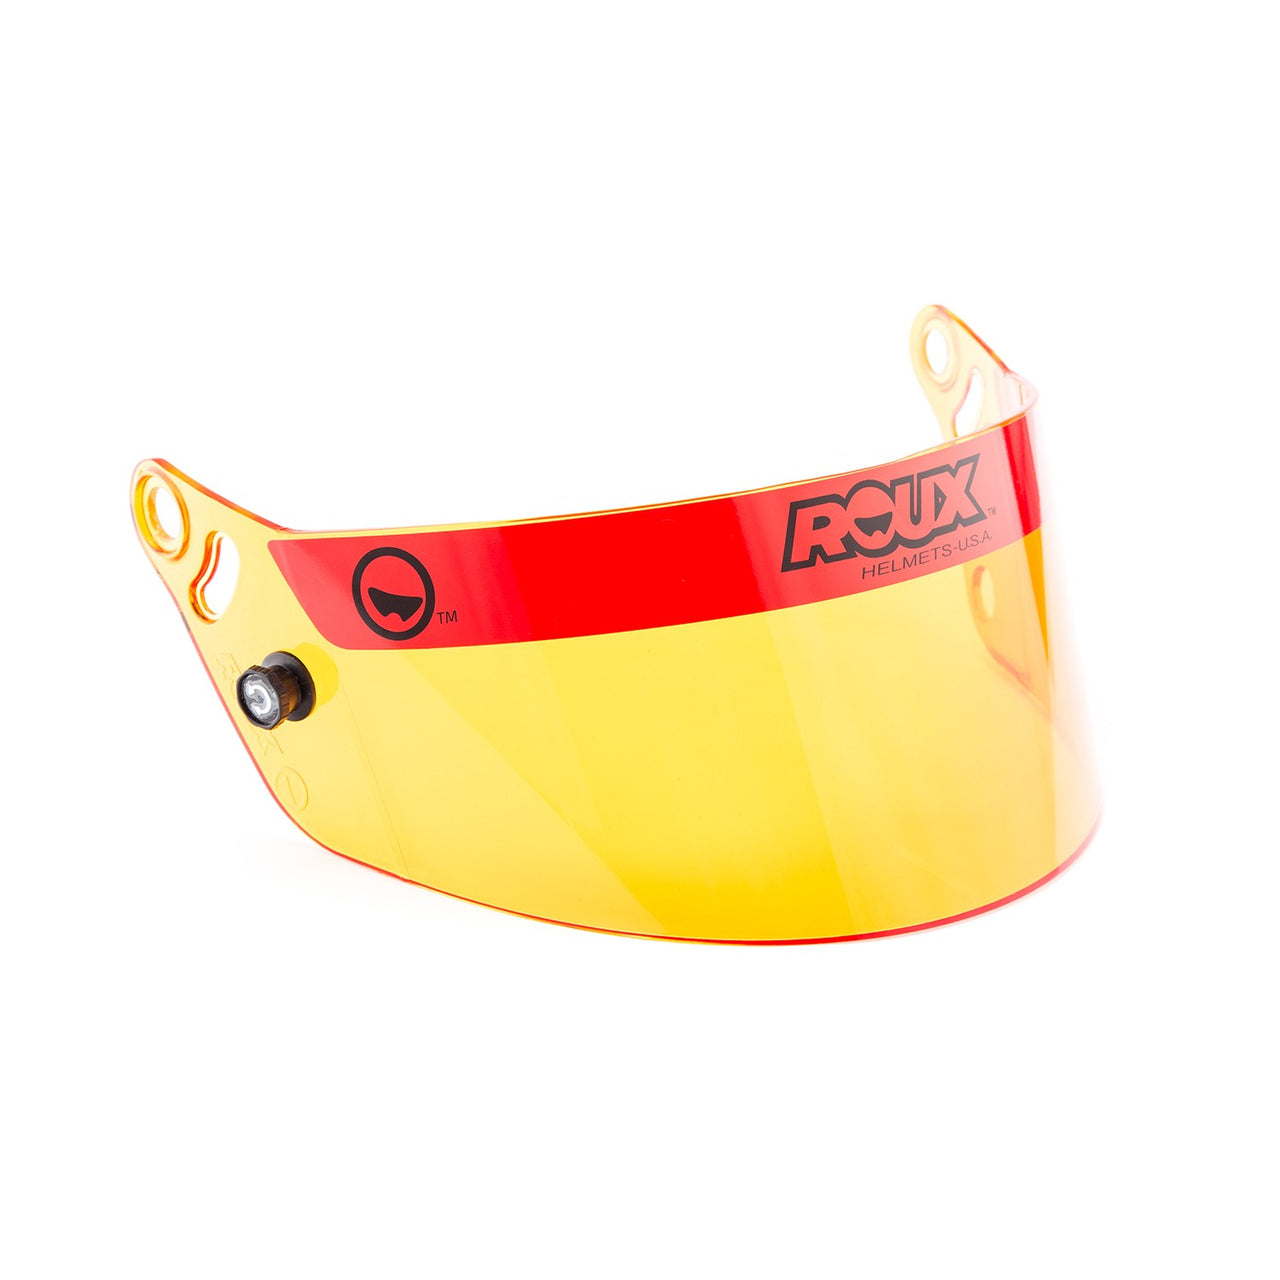 Roux Amber-Yellow Shield, Fits Roux R-1 Helmets